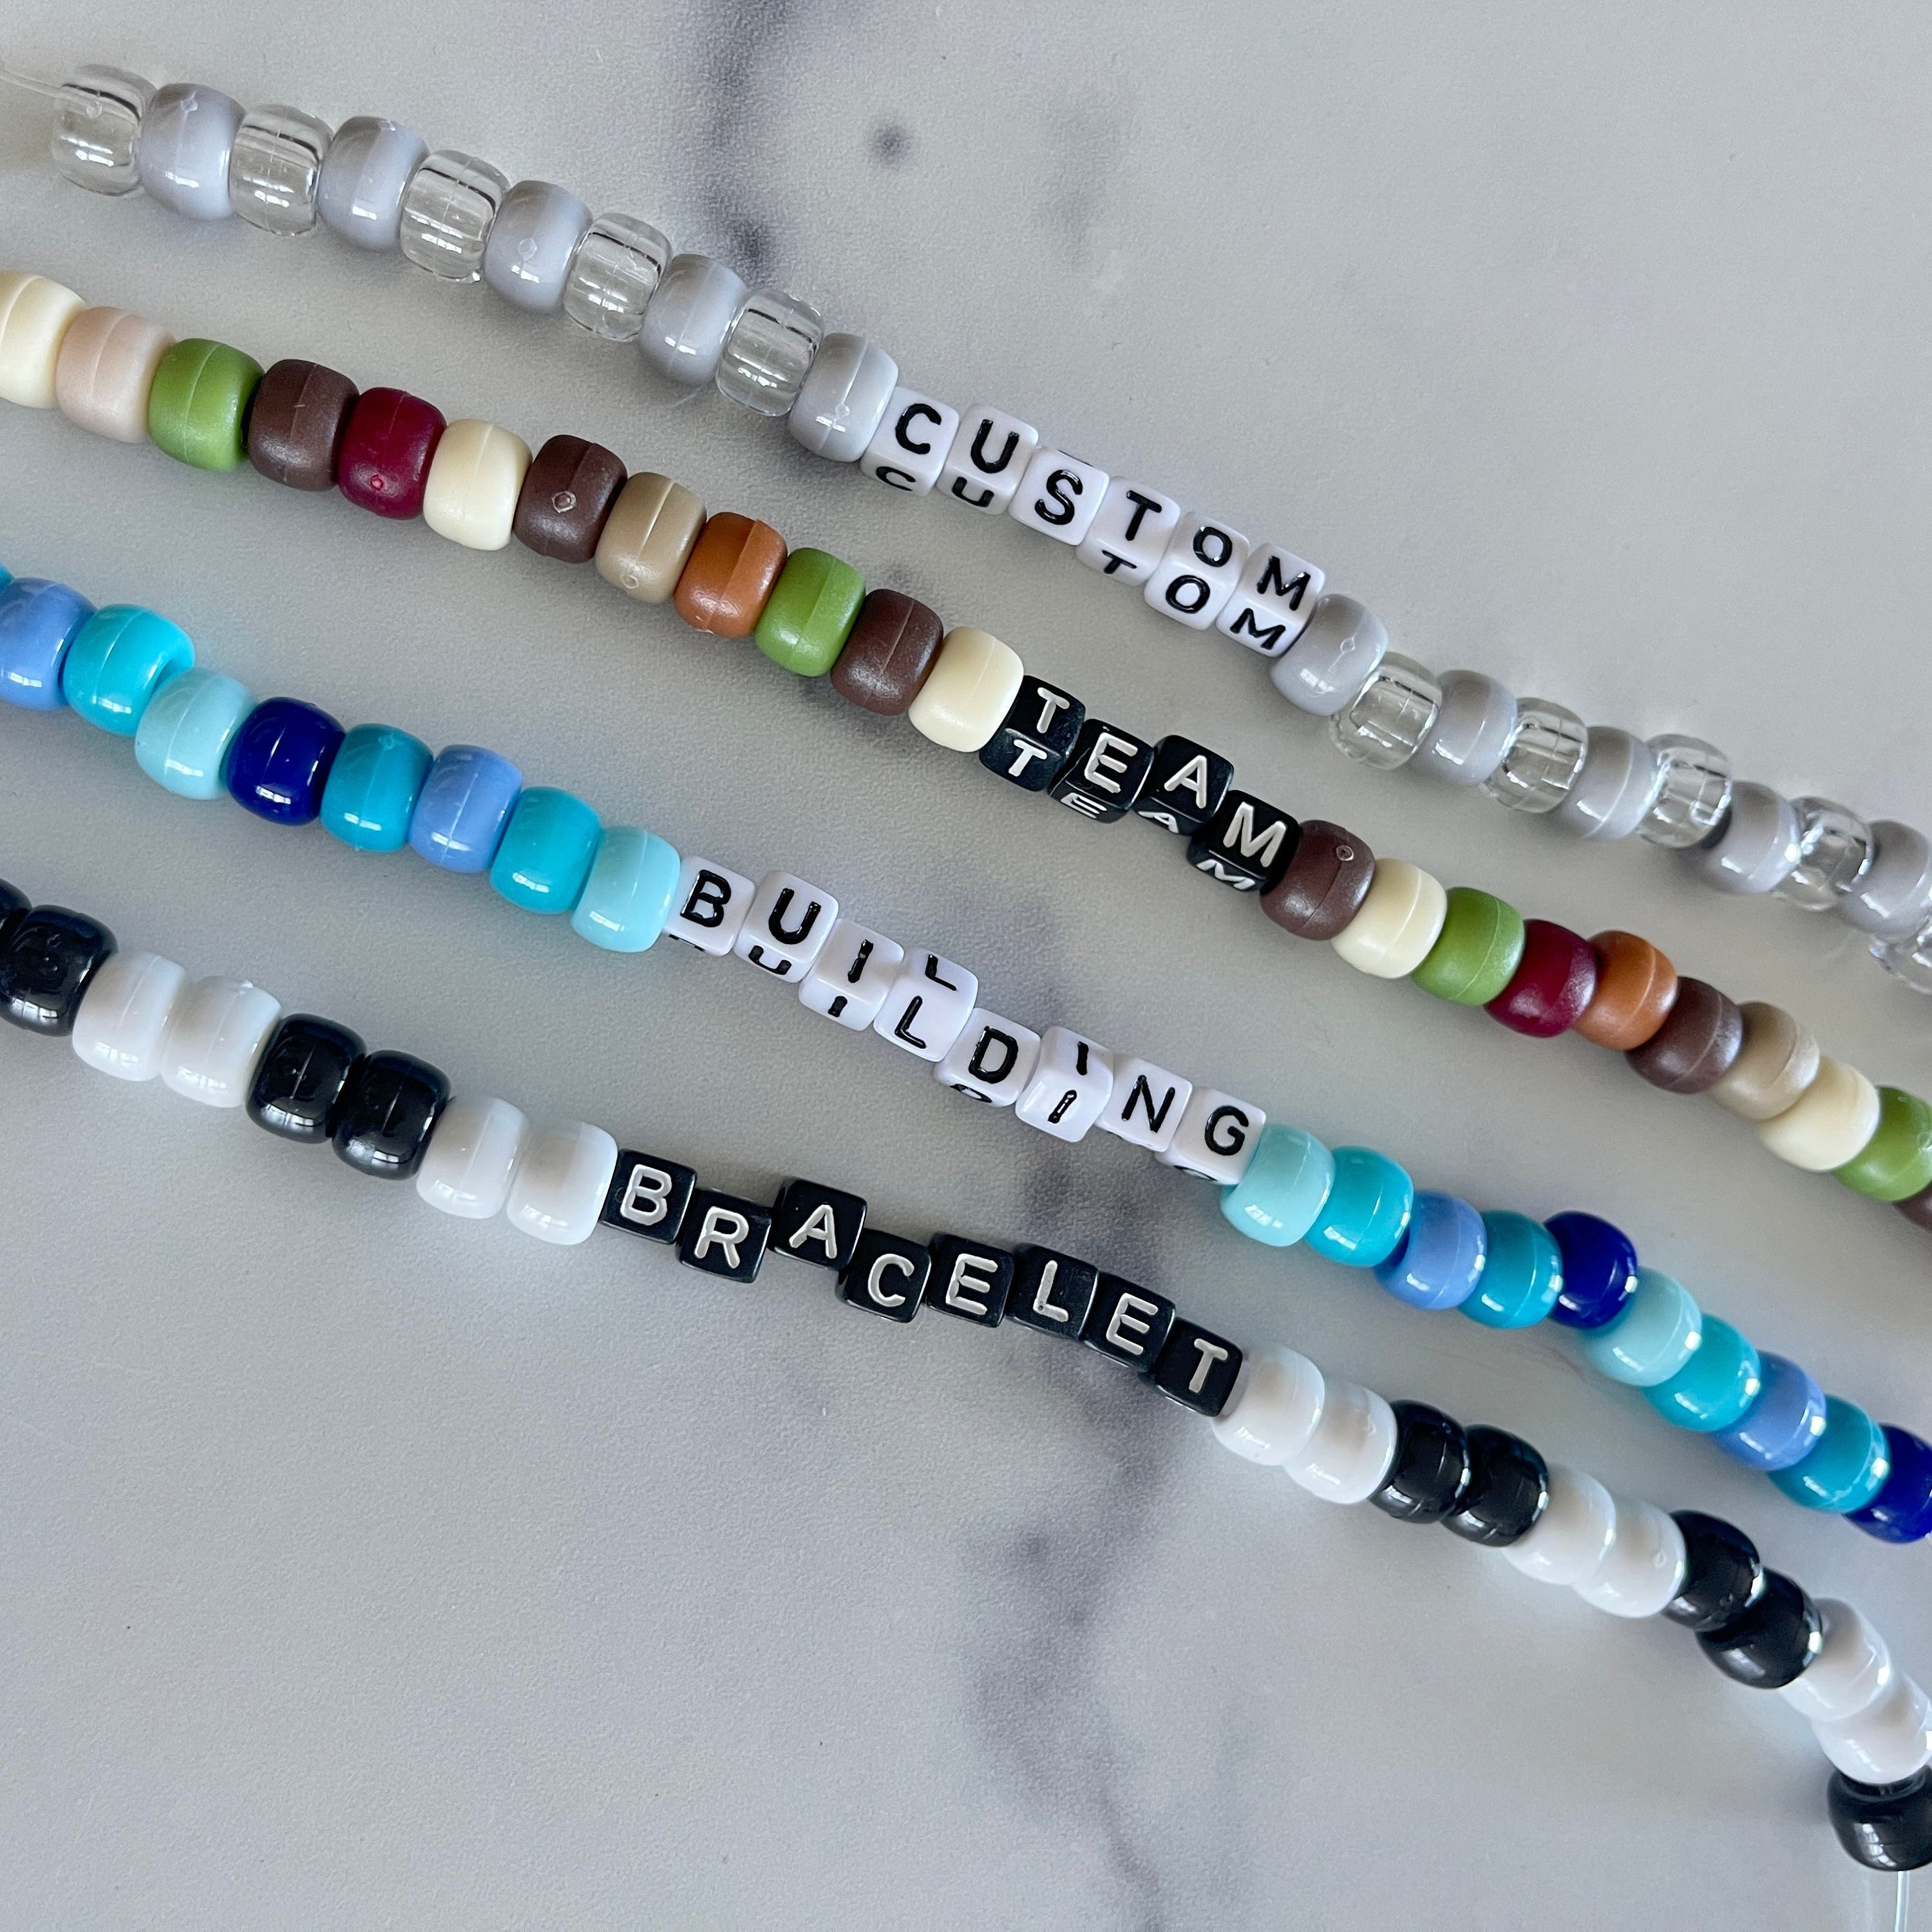 Beaded Friendship Bracelet, Personalize With Name or Word of Your Choice  Kandi, Festival Bracelet Ships Fast From USA 